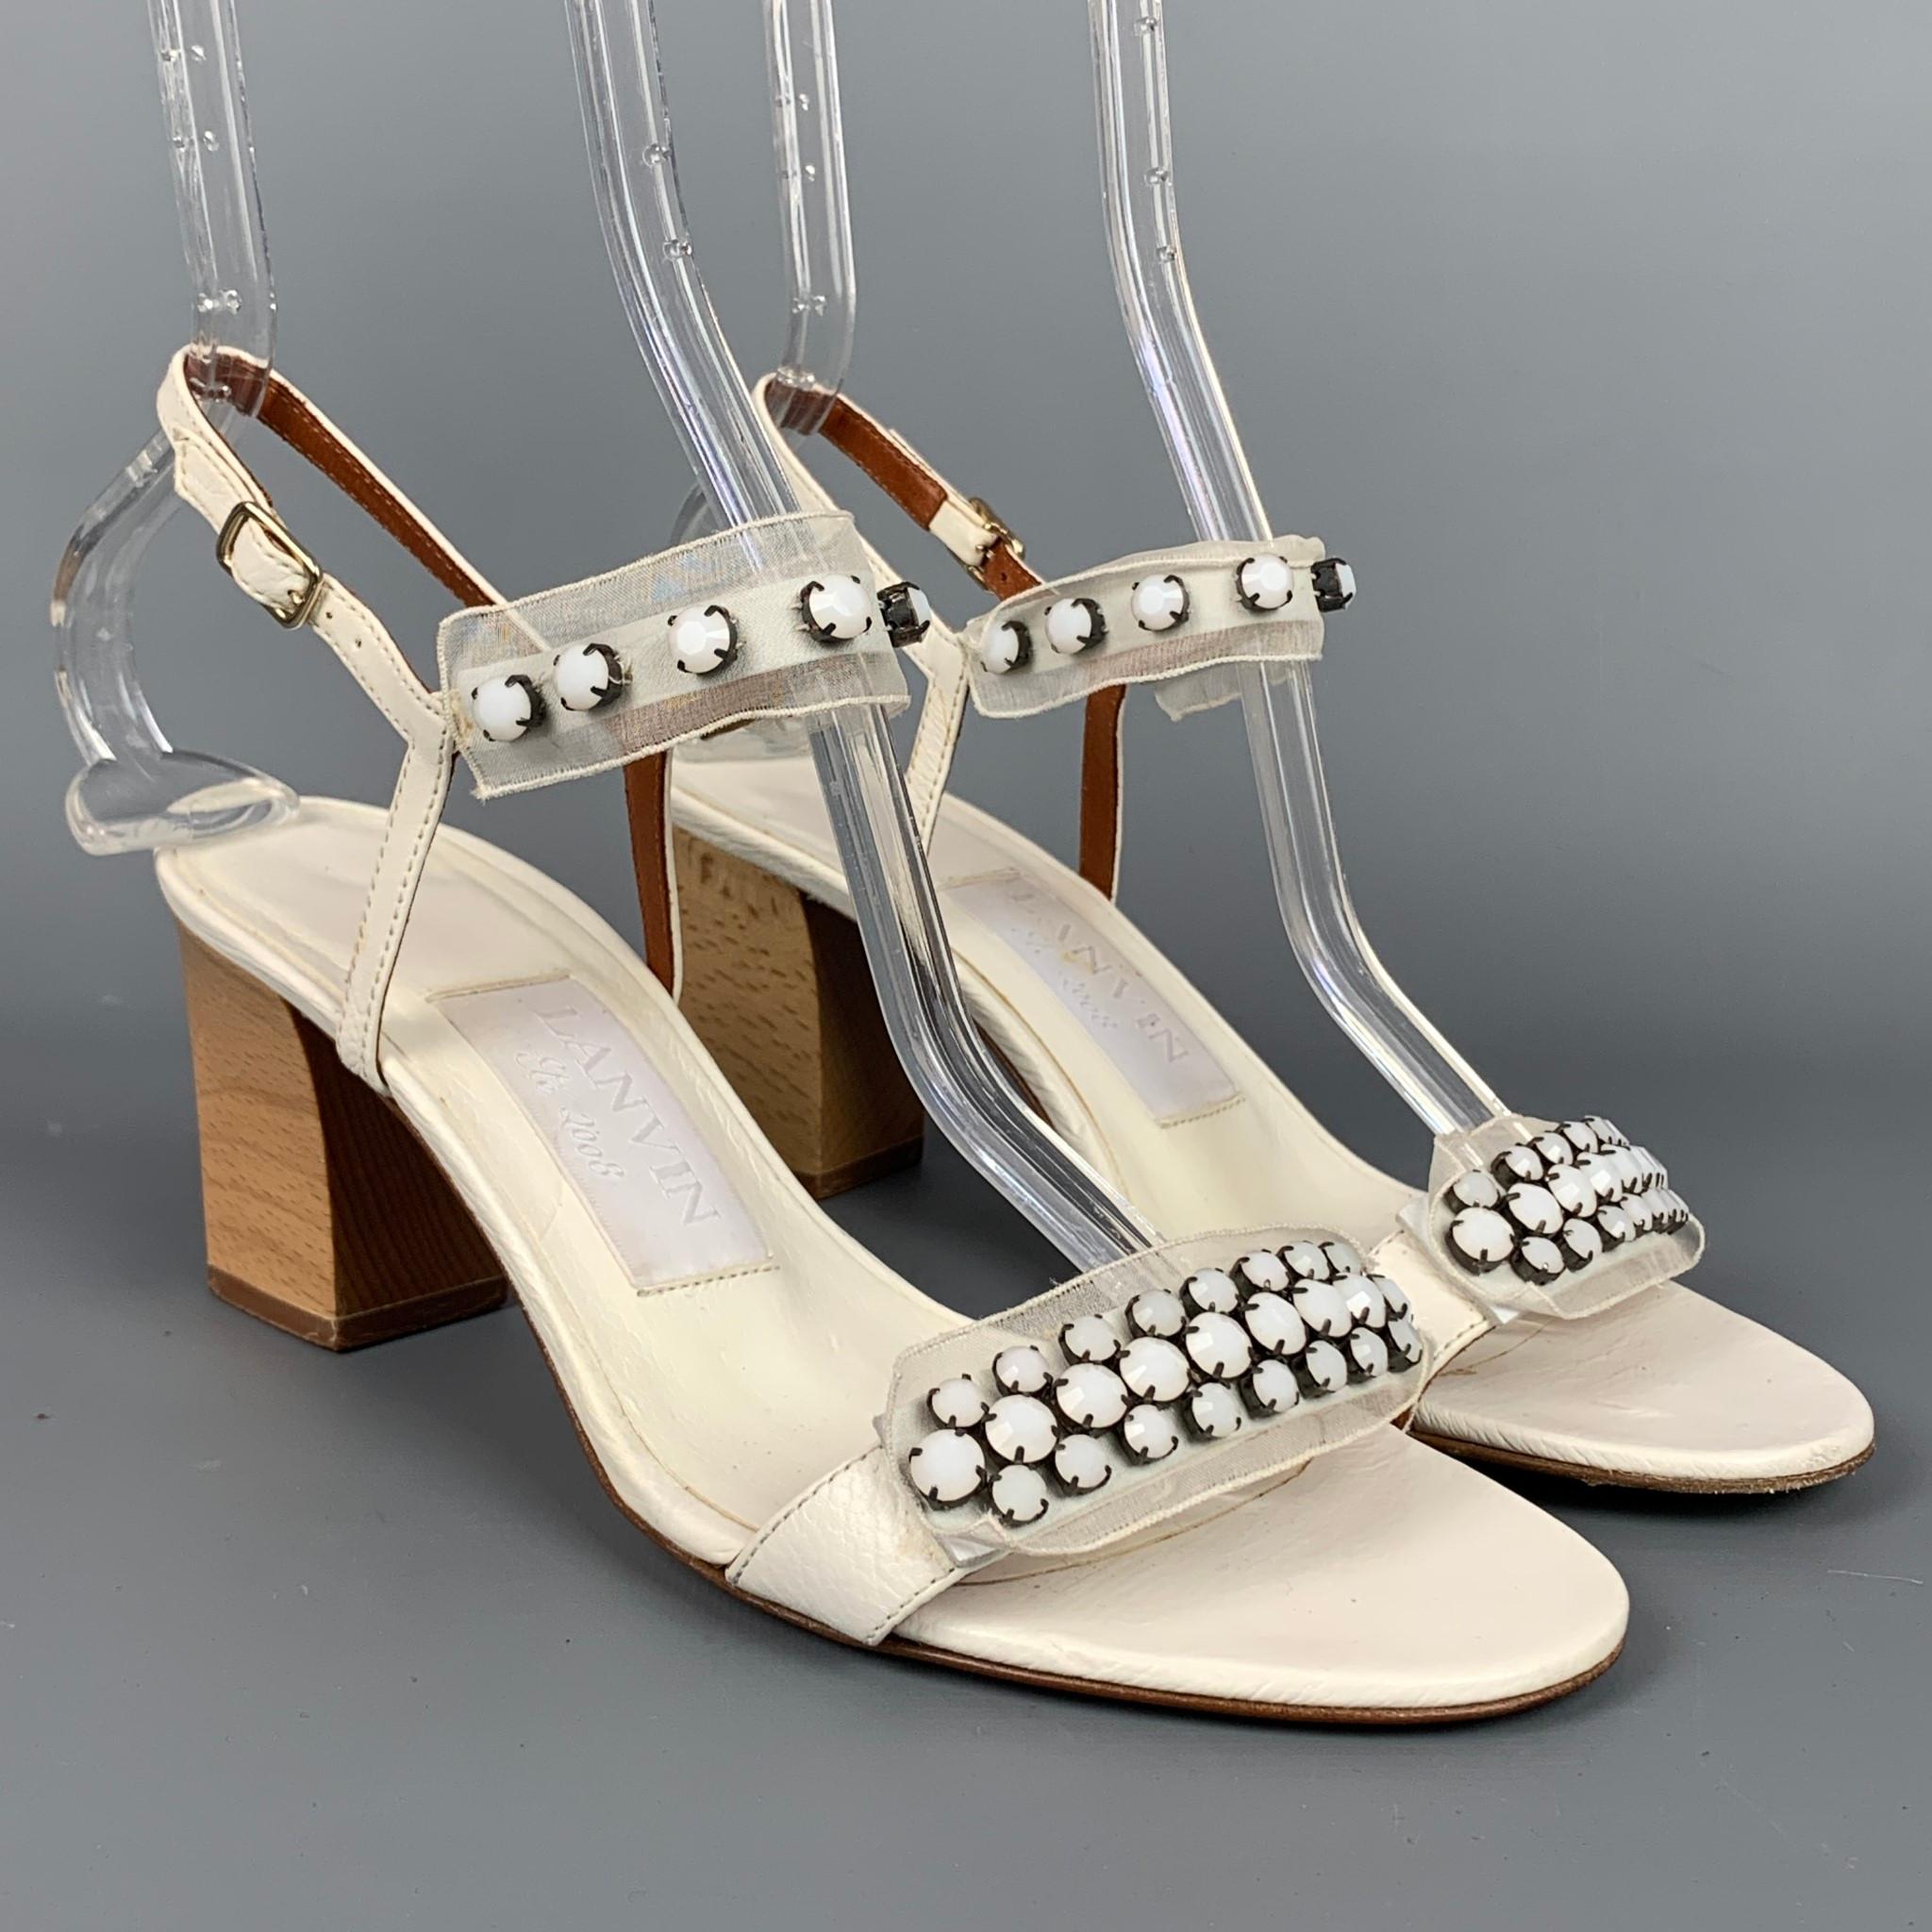 LANVIN sandals comes in a white natural leather with a silk ribbon featuring rhinestone details, strappy style, and a chunky heel. Made in Italy.

Good Pre-Owned Condition.
Marked: IT 38

Measurements:

Heel: 2.5 in.
 